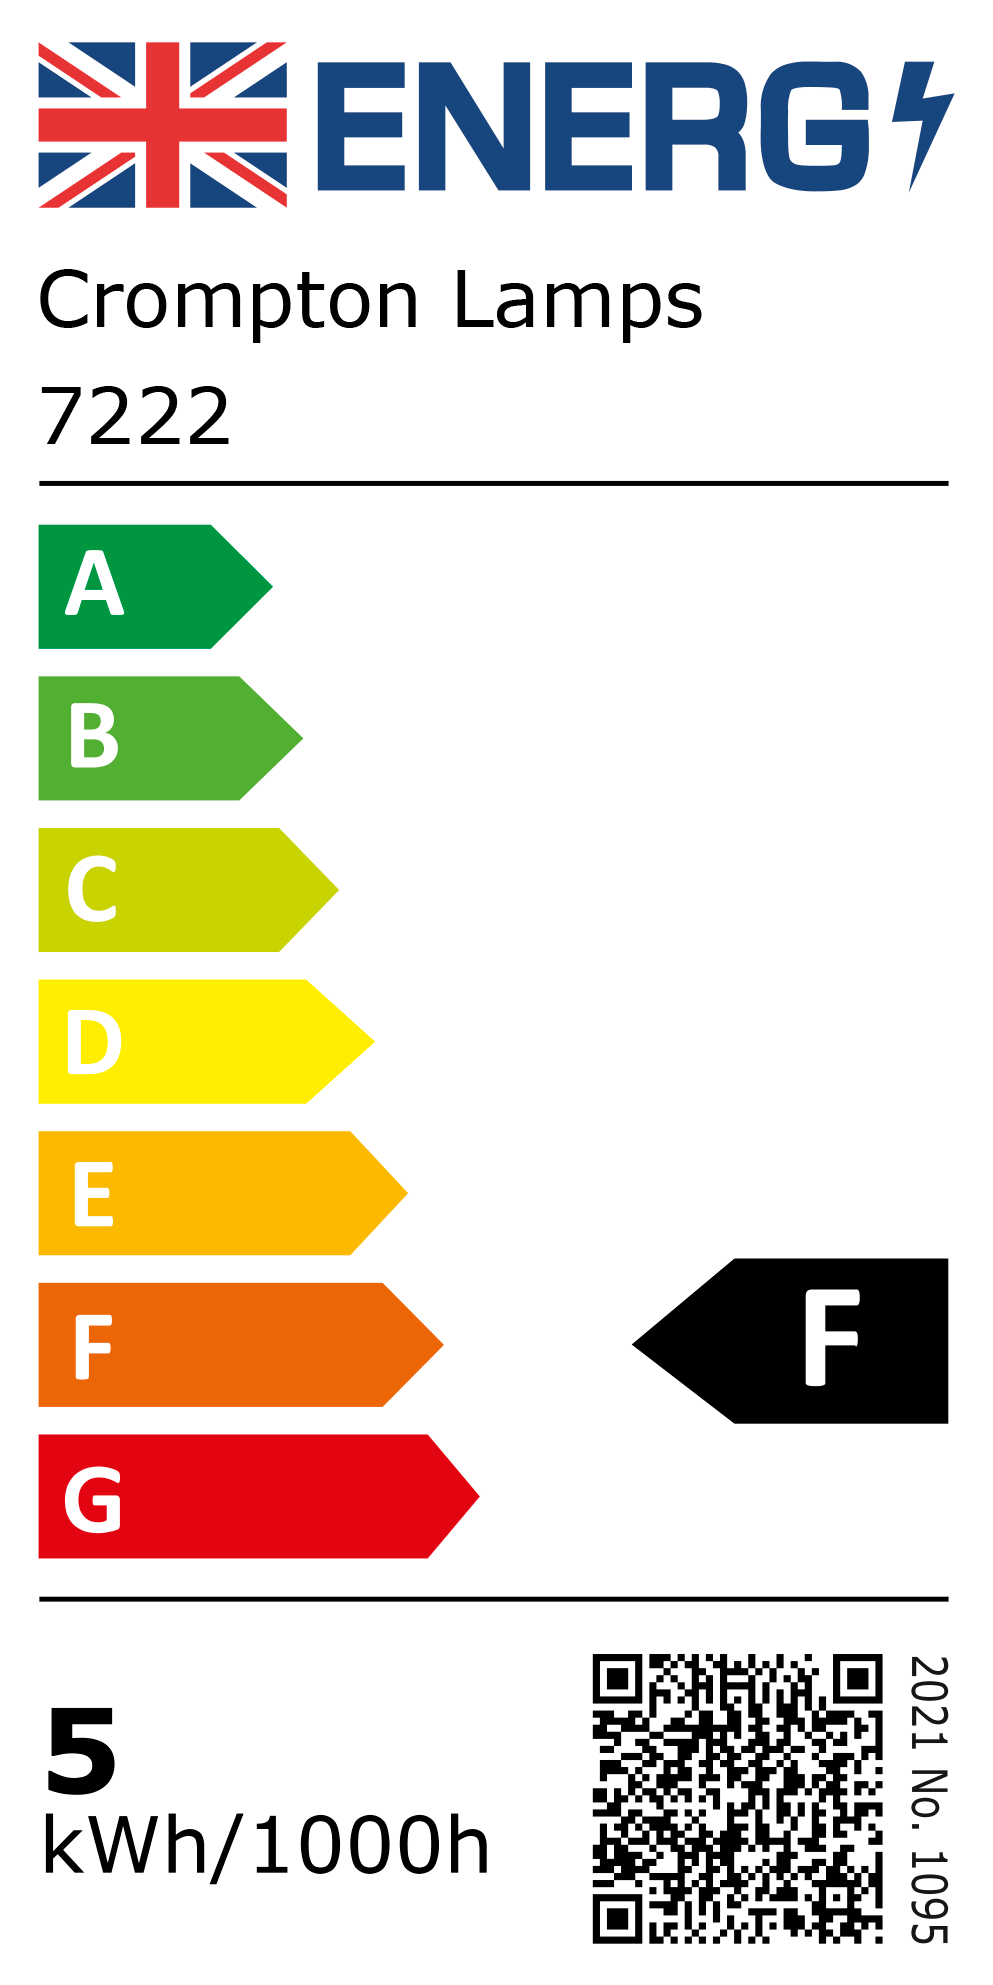 New 2021 Energy Rating Label: Stock Code 7222